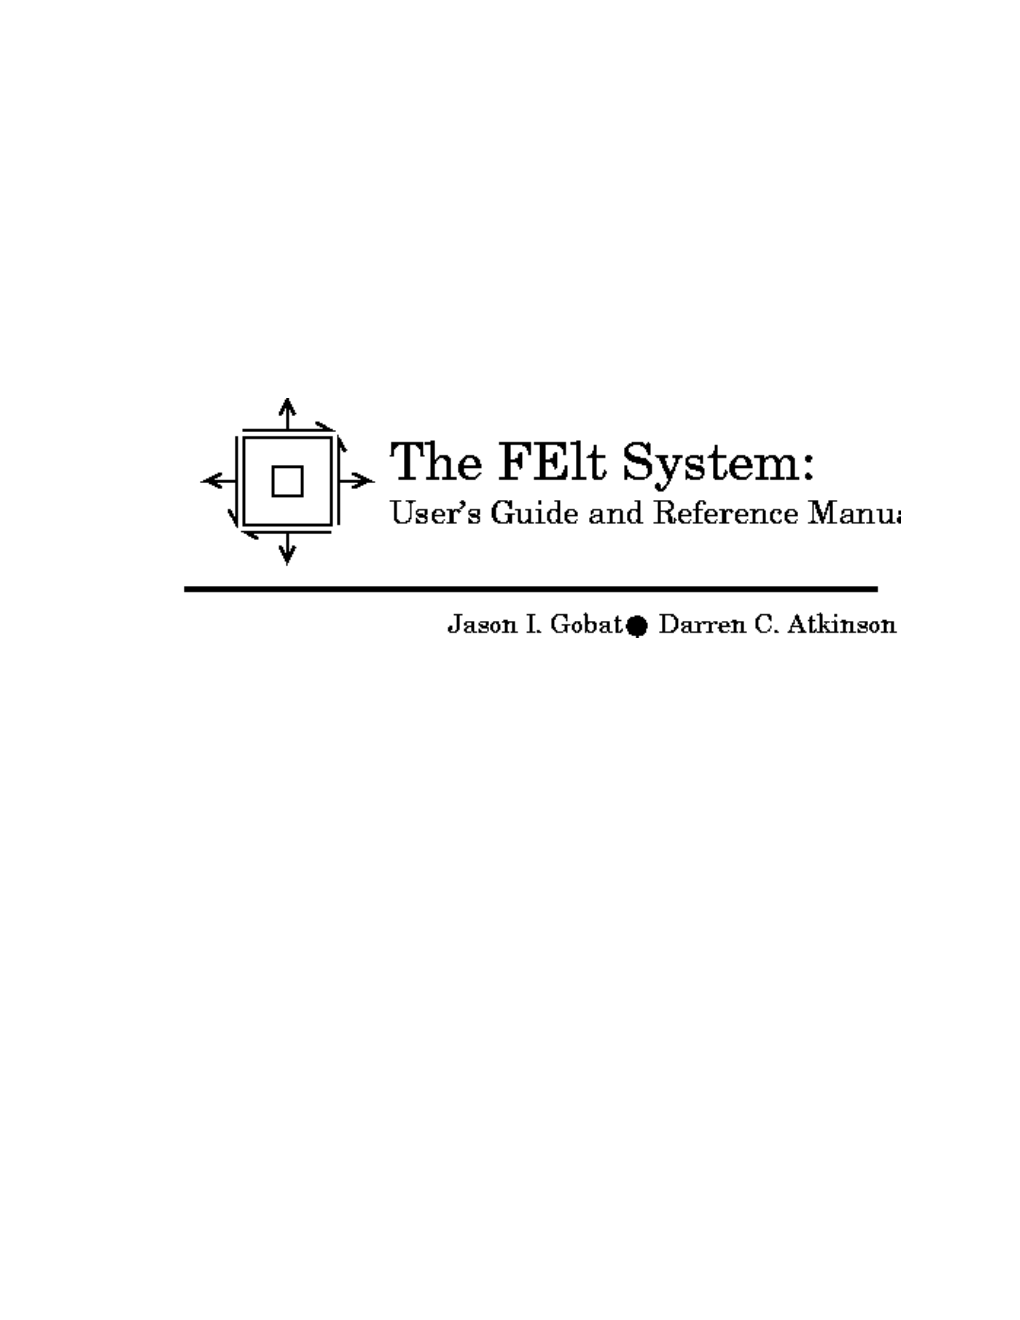 The Felt System: User's Guide and Reference Manual